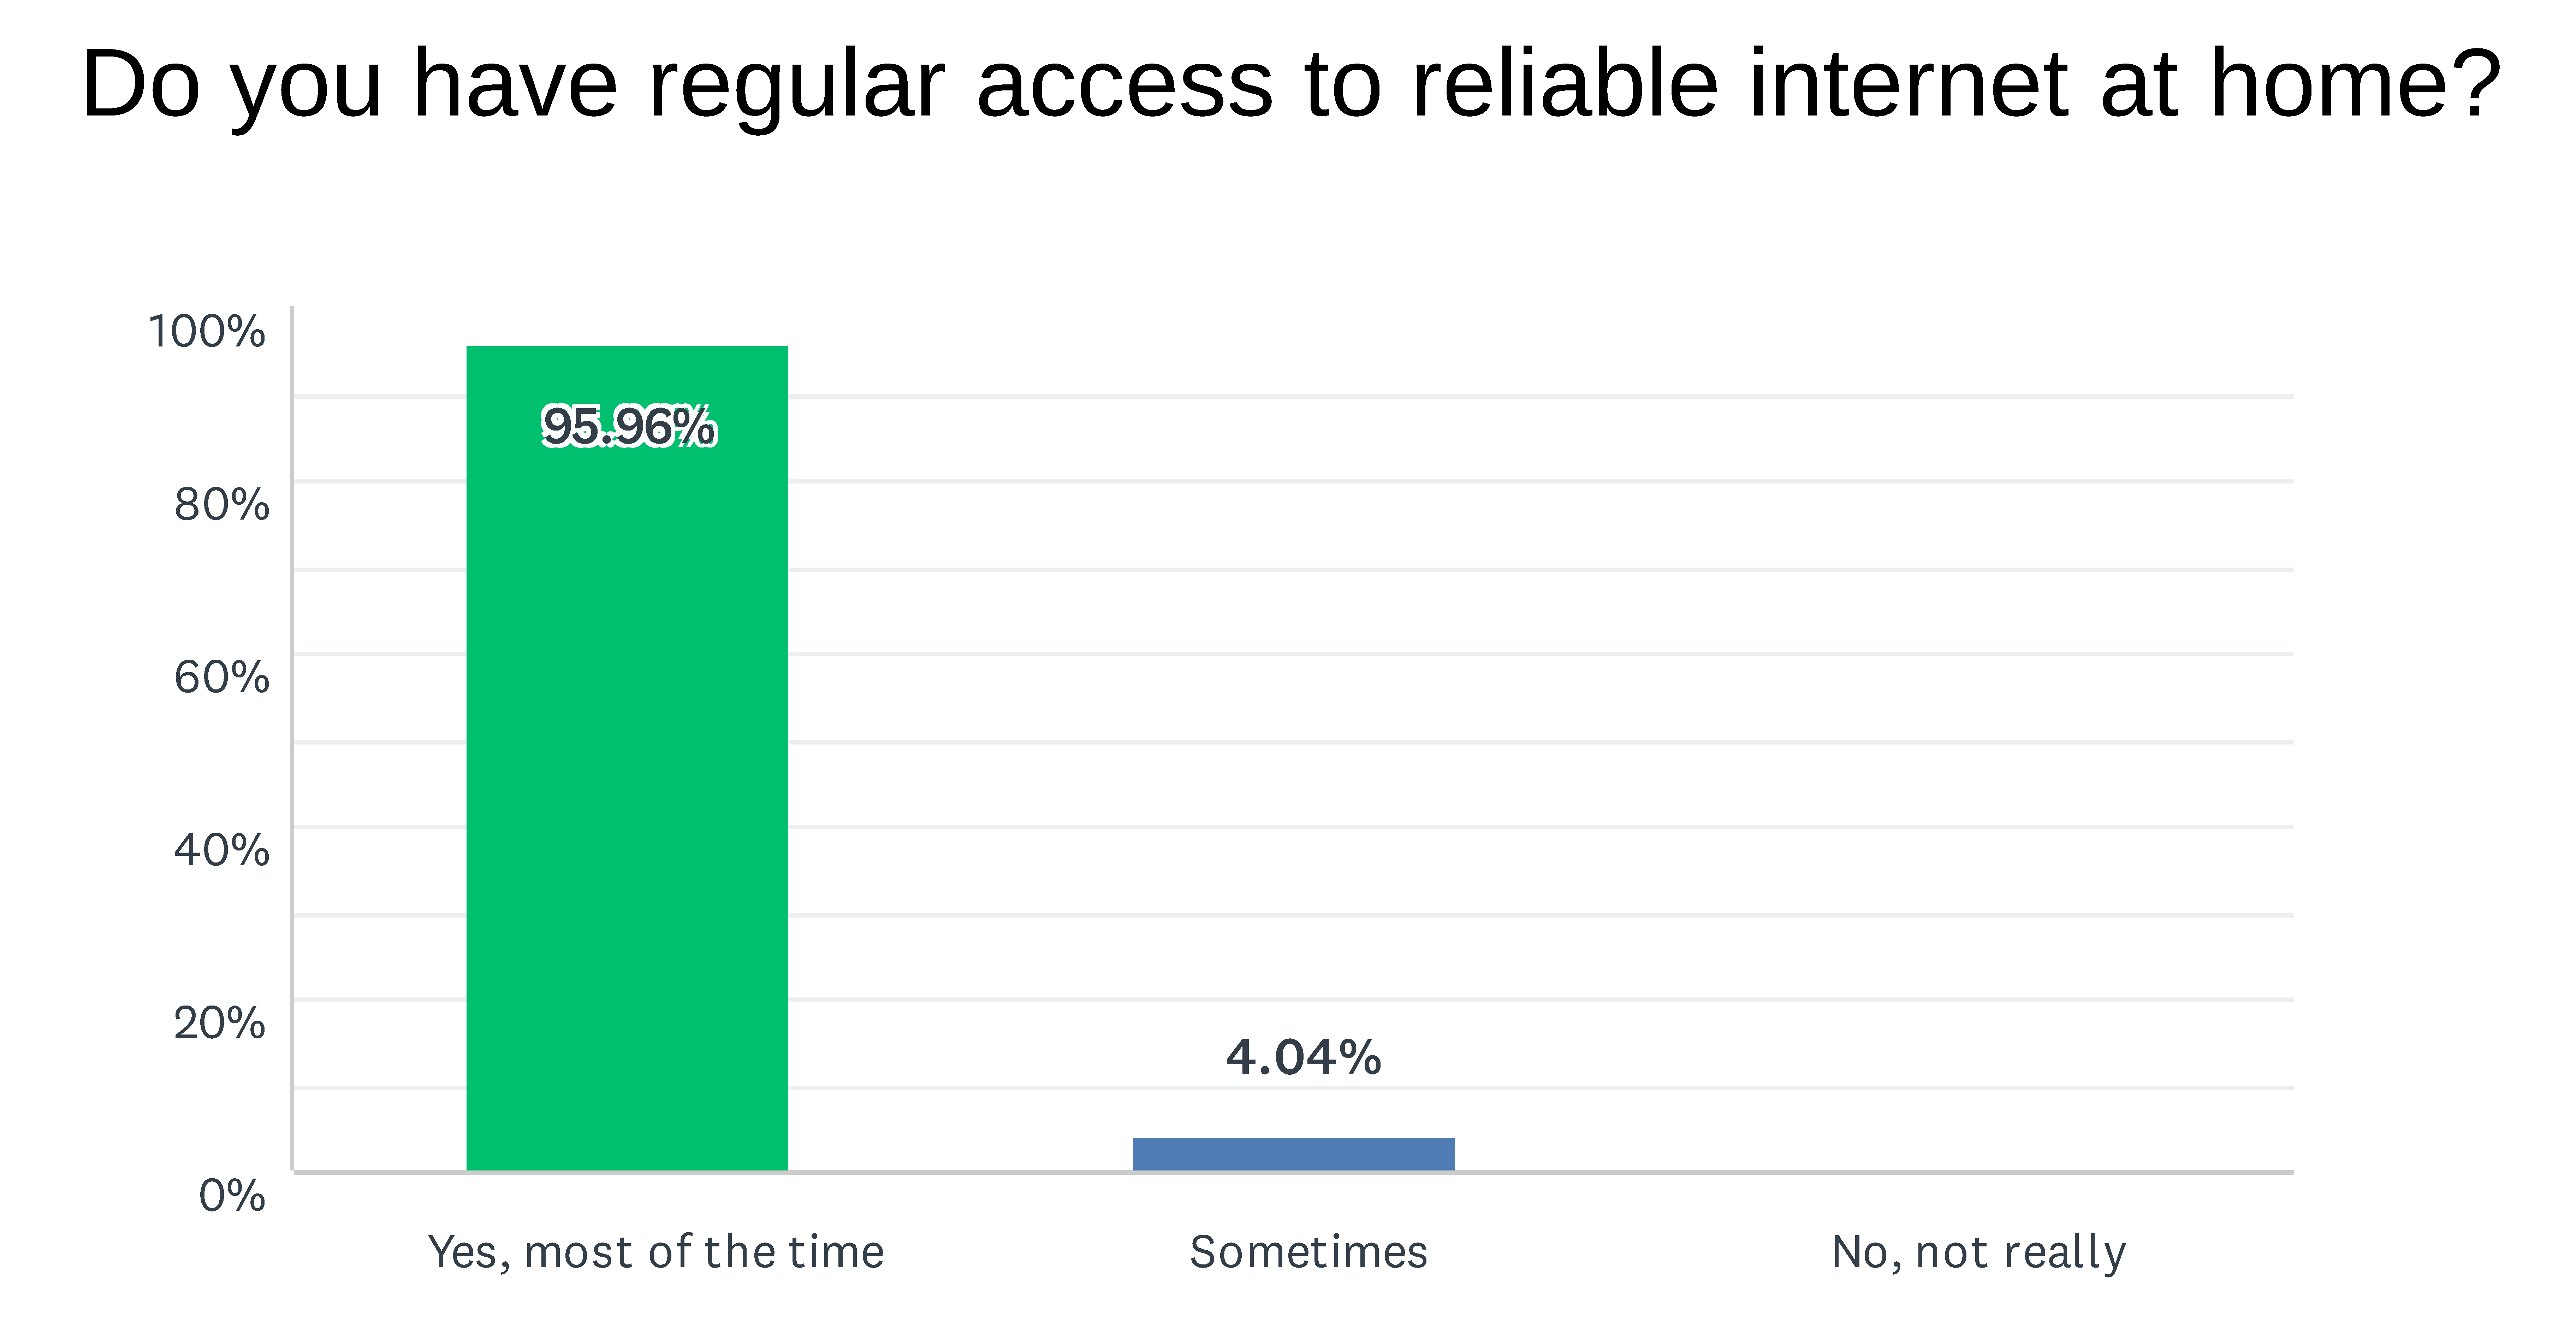 Survey question: do you have regular access to reliable internet at home? 95.96% yes, most of the time; 4.04% sometimes; 0% no, not really.